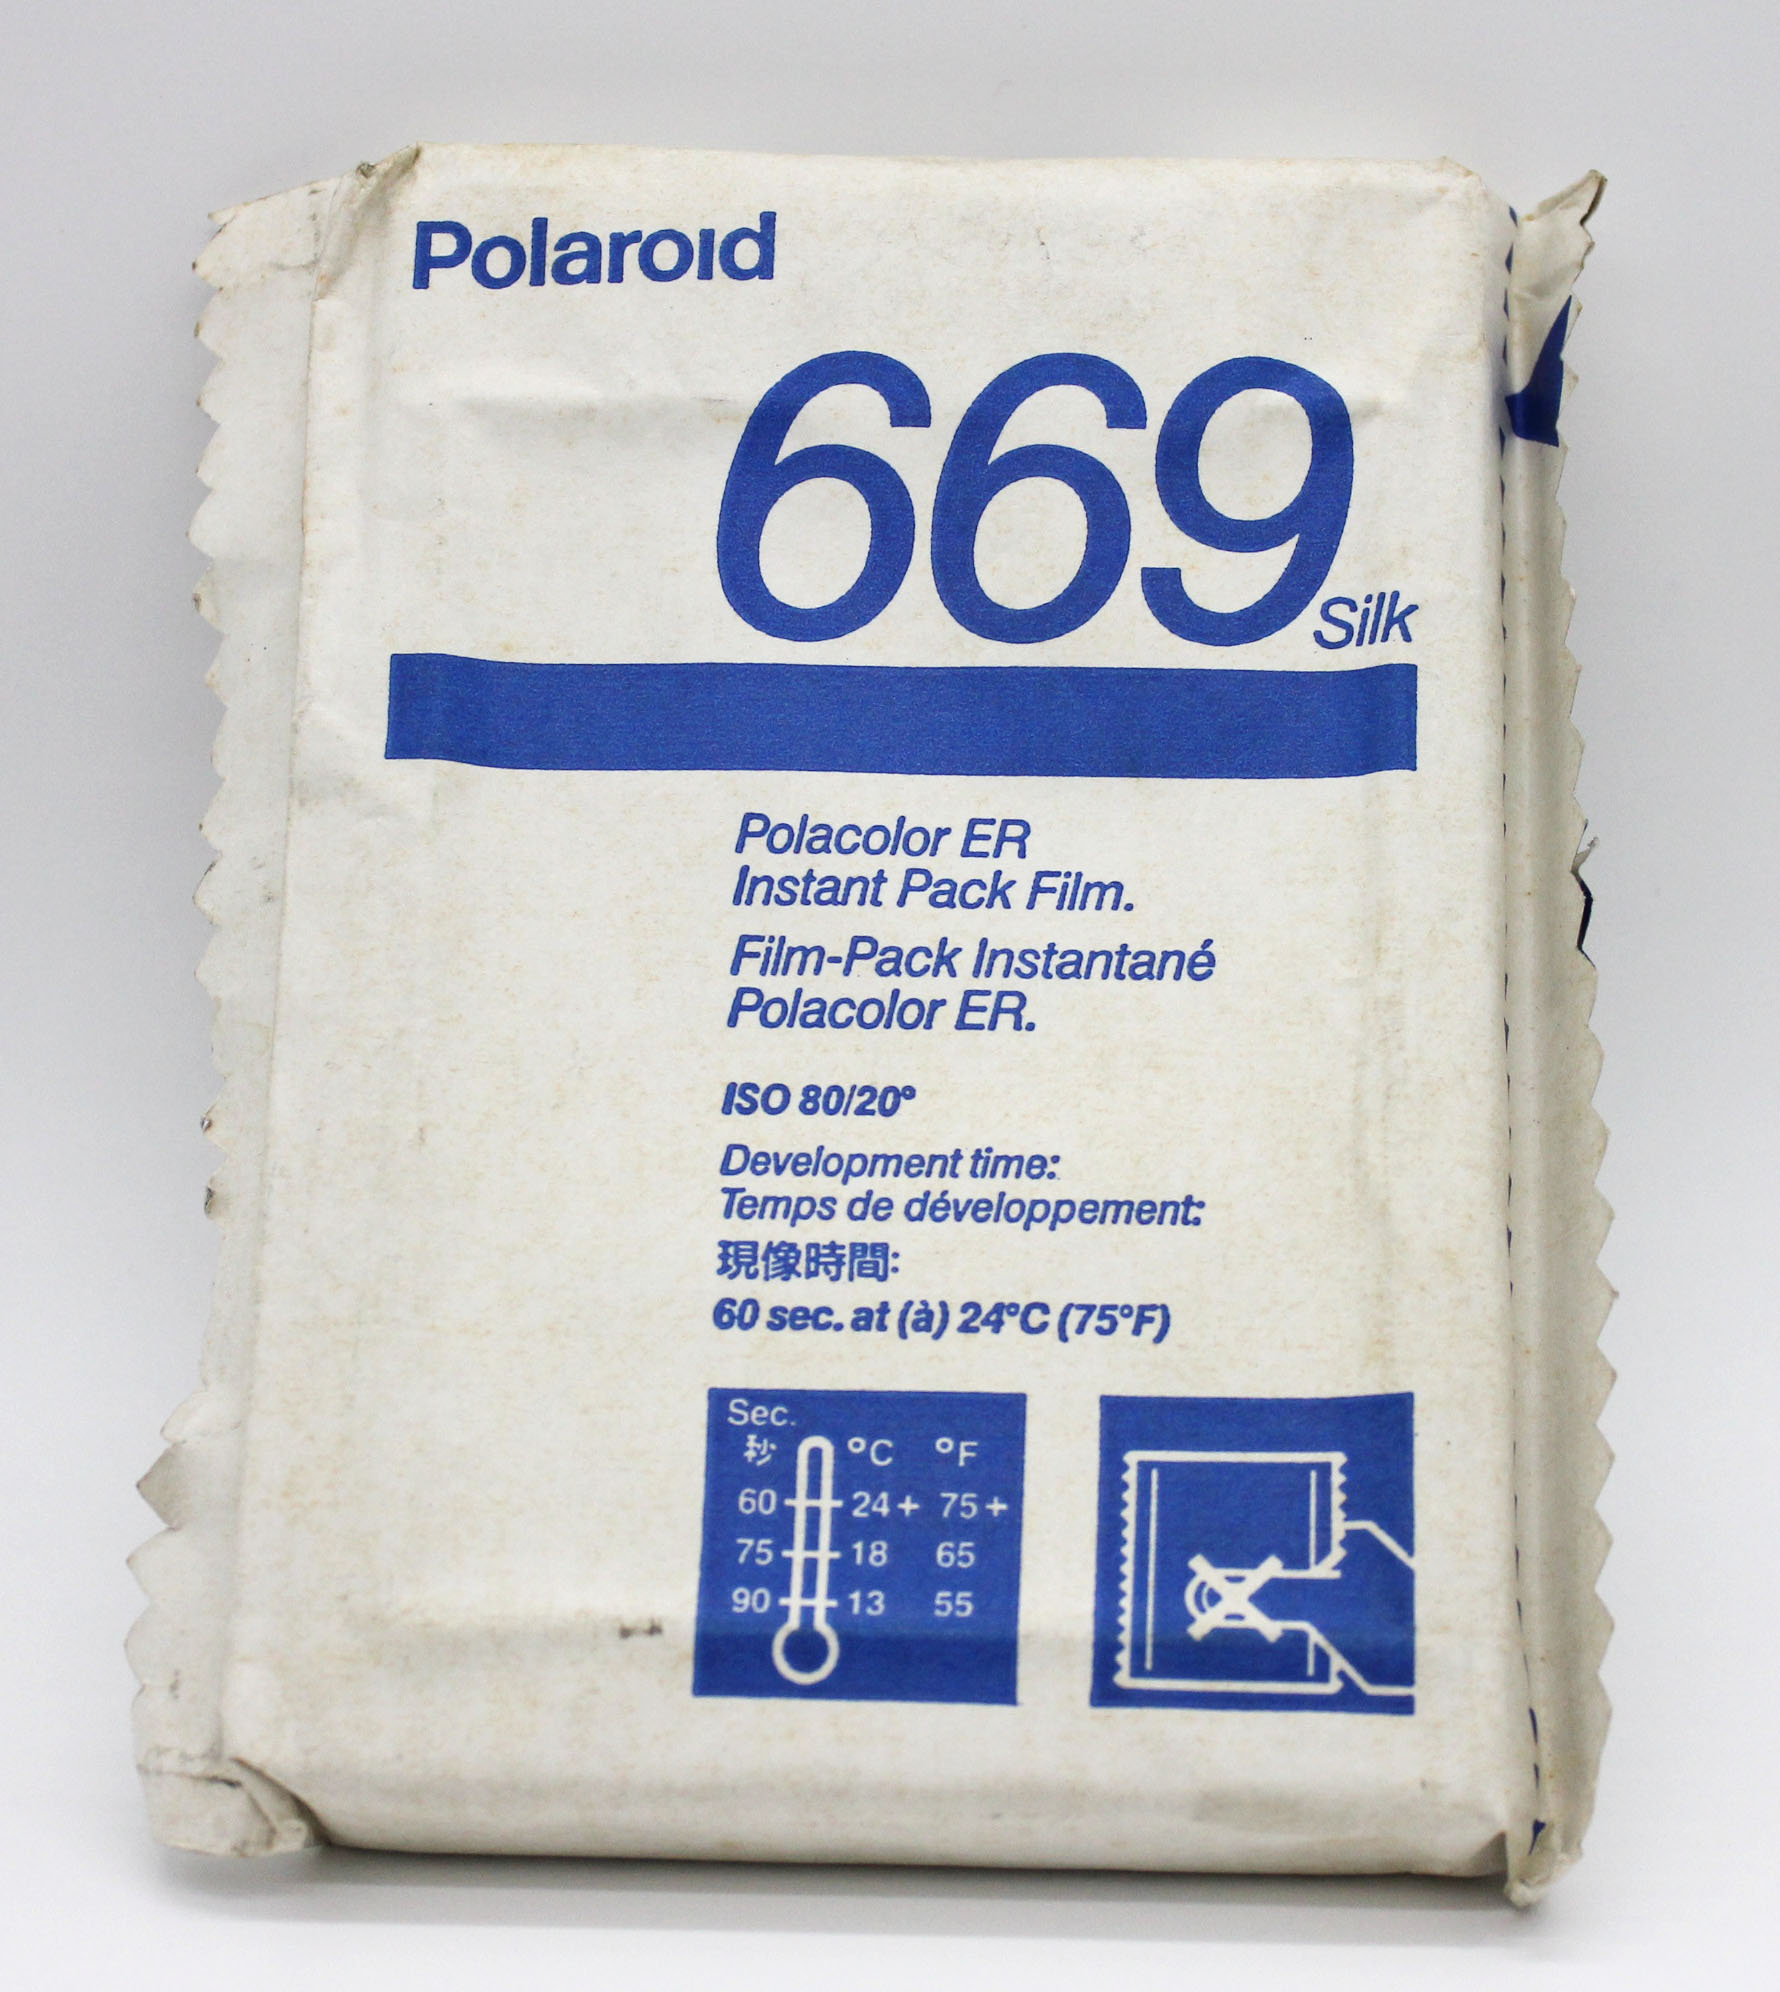 Japan Used Camera Shop | [Unused] Polaroid 669 Silk Polacolor ER Instant Pack Film Expired 12/1991 from Japan